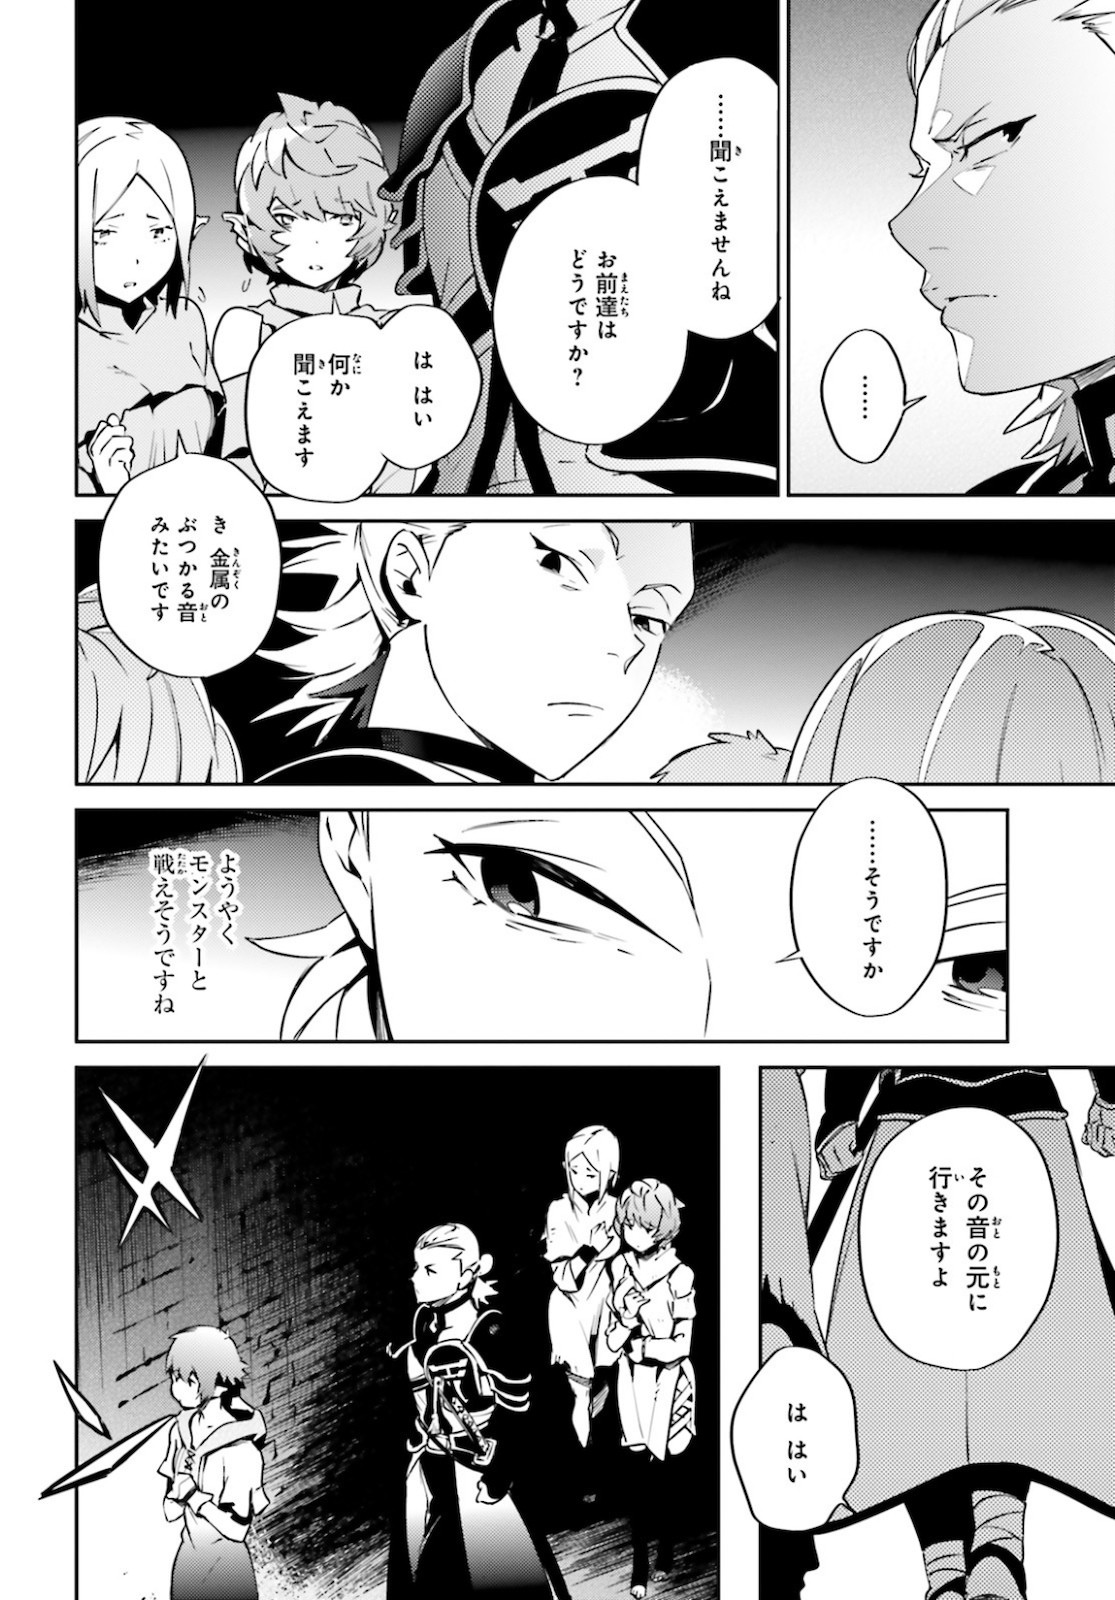 Overlord - Chapter 63 - Page 40